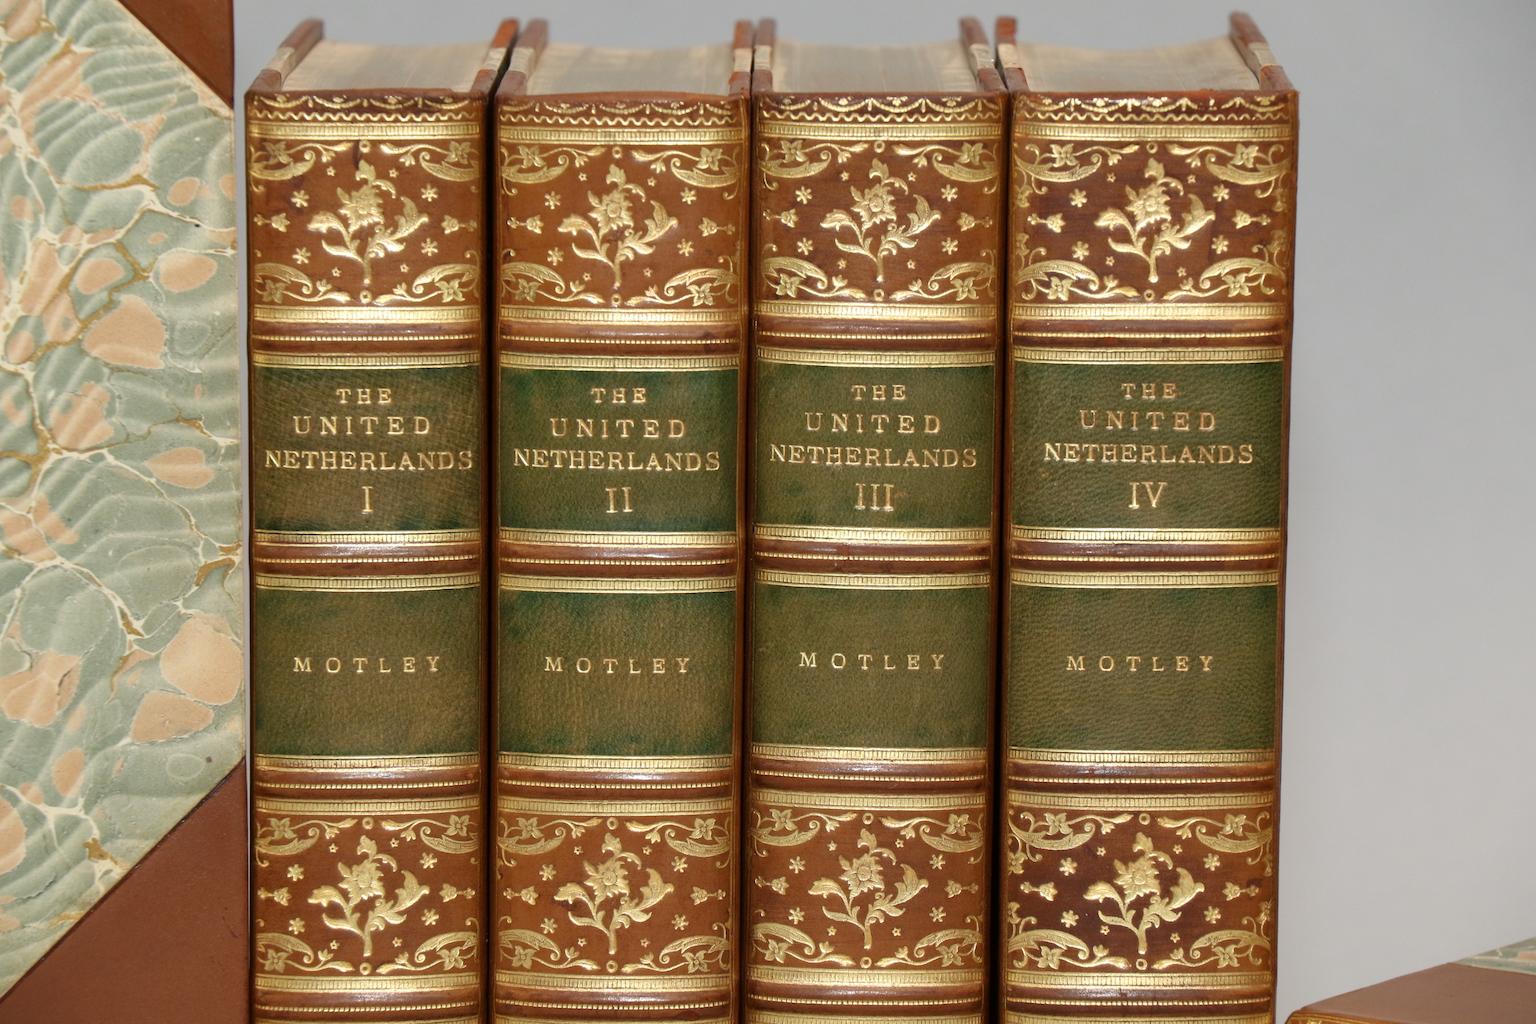 Leatherbound. Nine volumes. Octavo. Bound in three quarter tan calf by Zaehnsdorf Binders, marbled boards, top edges gilt, raised bands, & ornate gilt on spines. Titles include: 